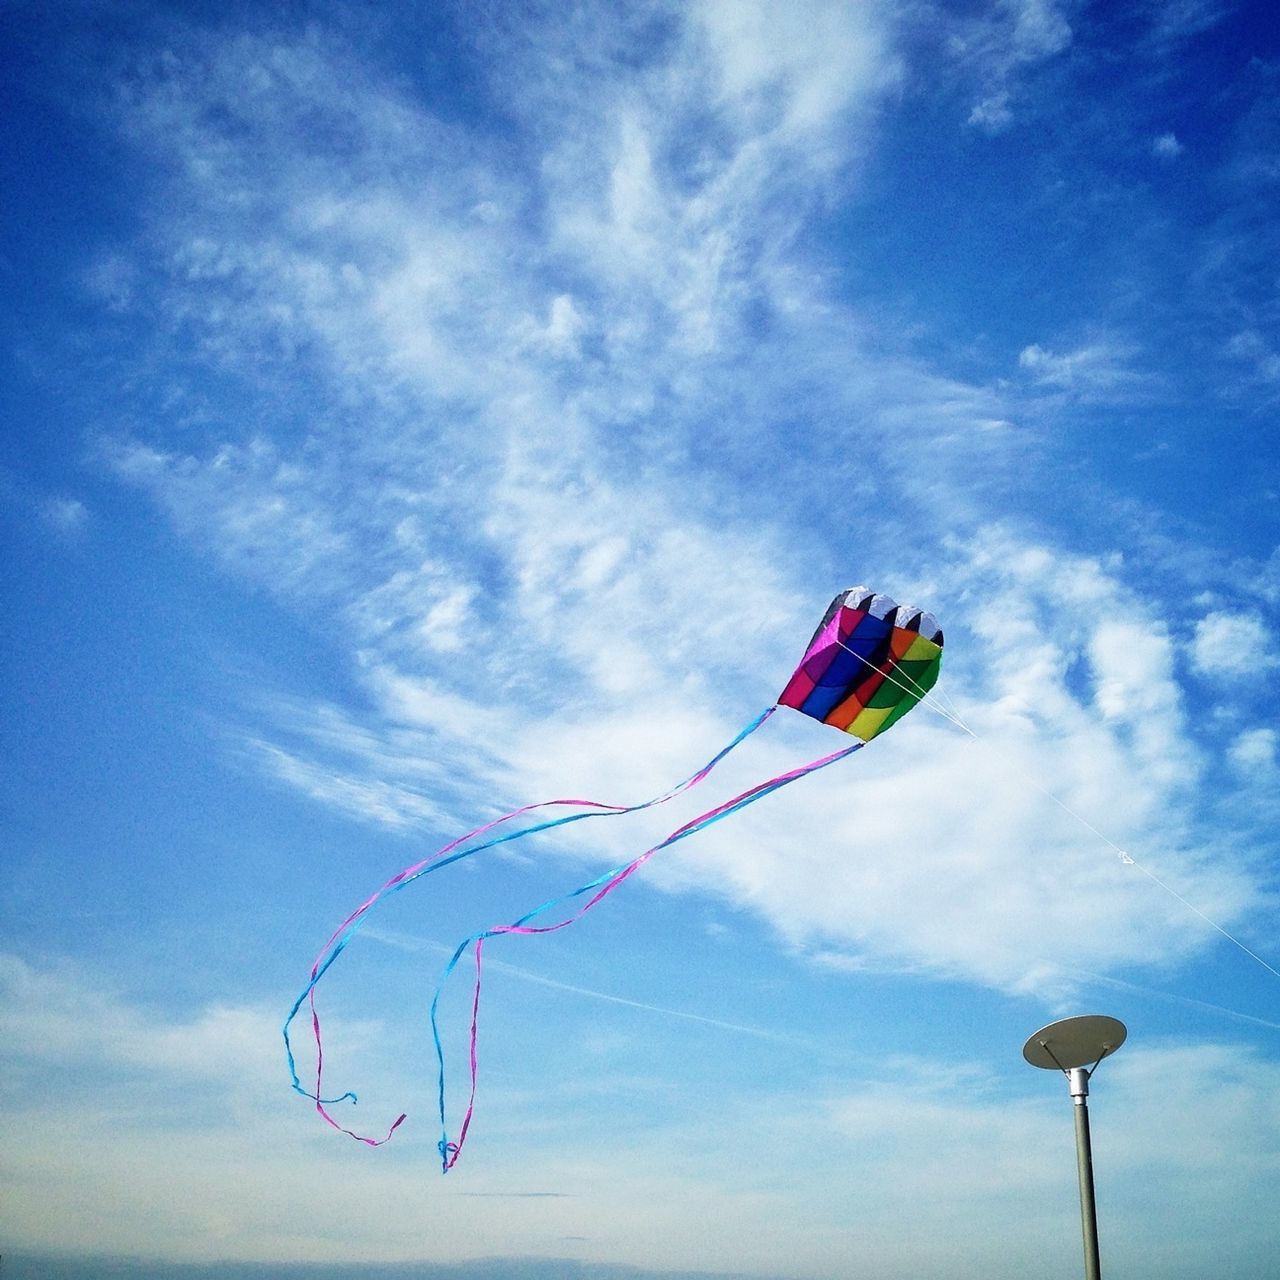 low angle view, sky, blue, cloud - sky, cloud, multi colored, pole, wind, day, flag, fun, identity, mid-air, outdoors, balloon, sport, hanging, childhood, no people, cloudy